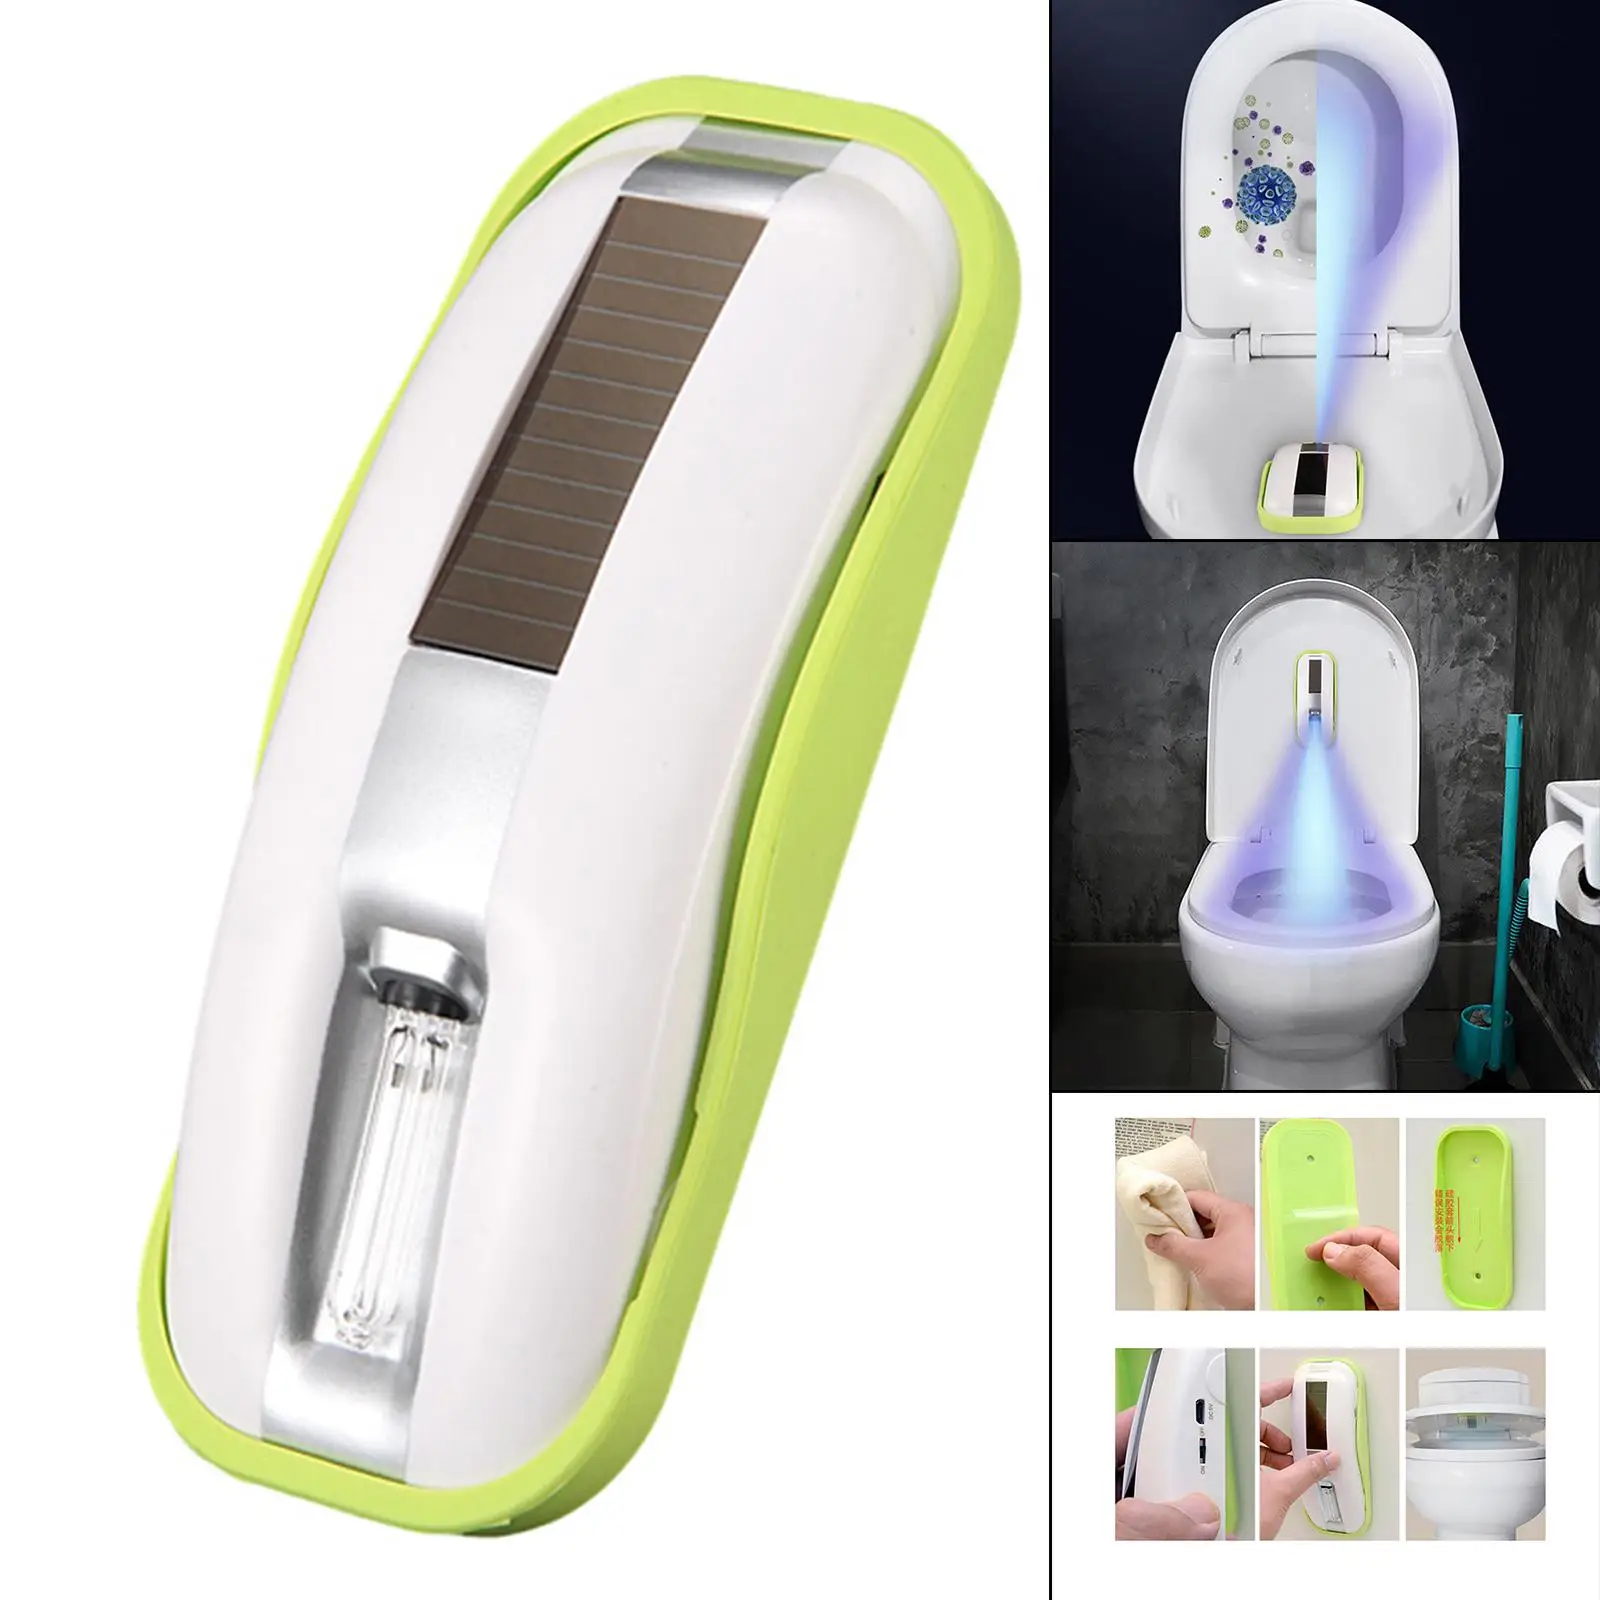 Toilet Light Sterilizer, Disinfection Light, USB Charging -C Disinfection Lamp, Ultraviolet Cleaning Gadget for Home Office